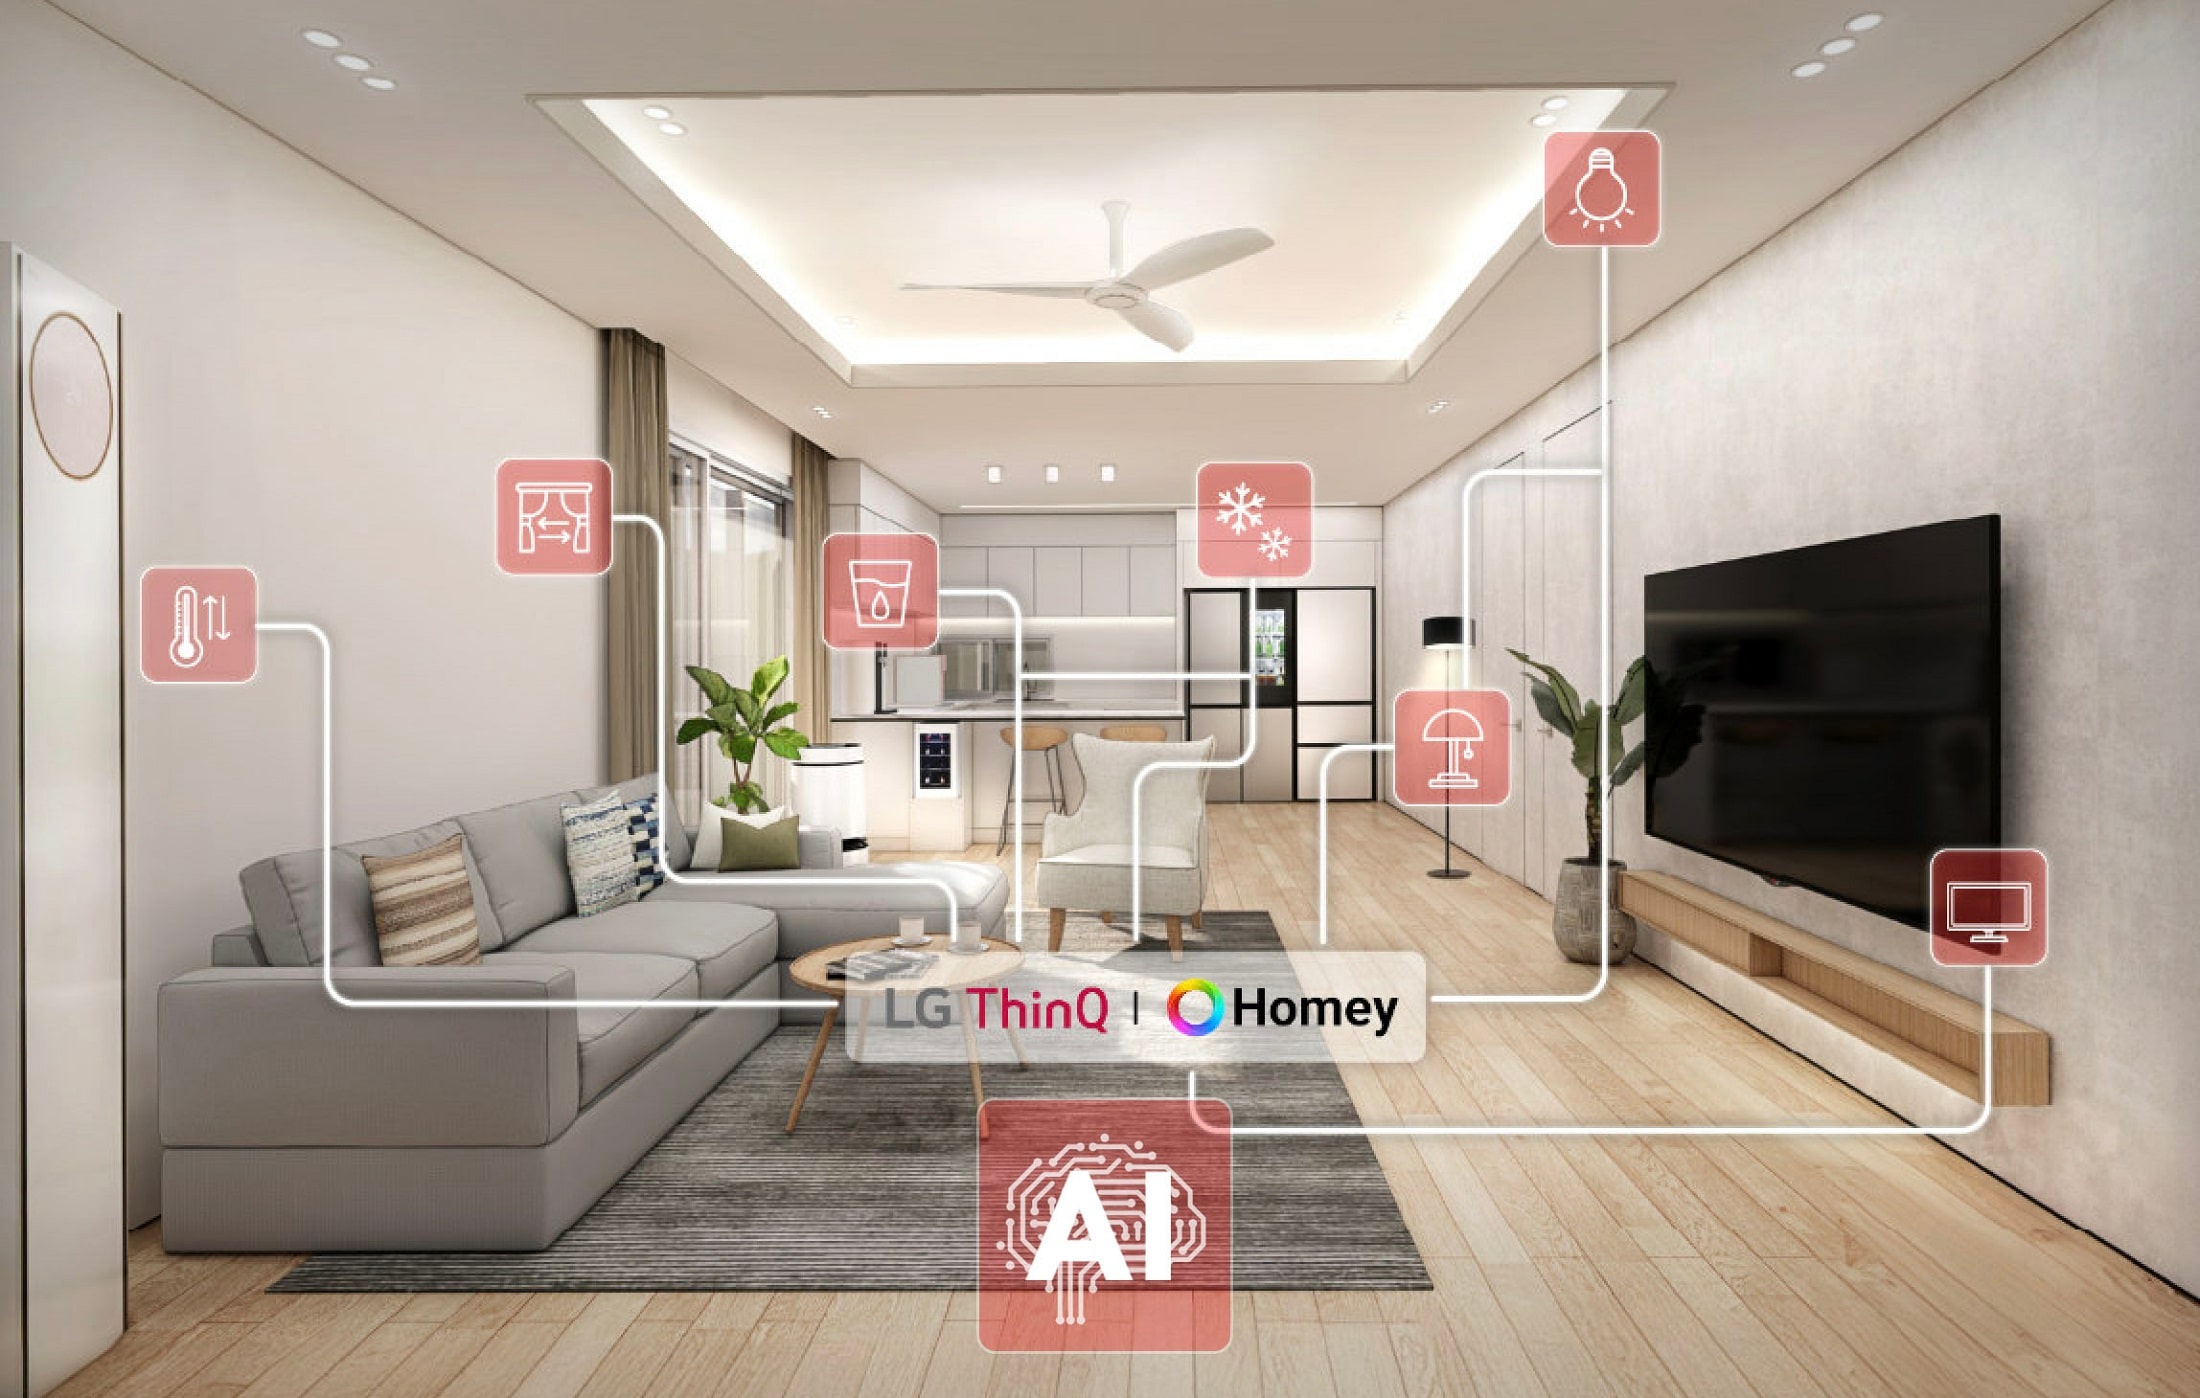 A living room with the connections available with AI connections